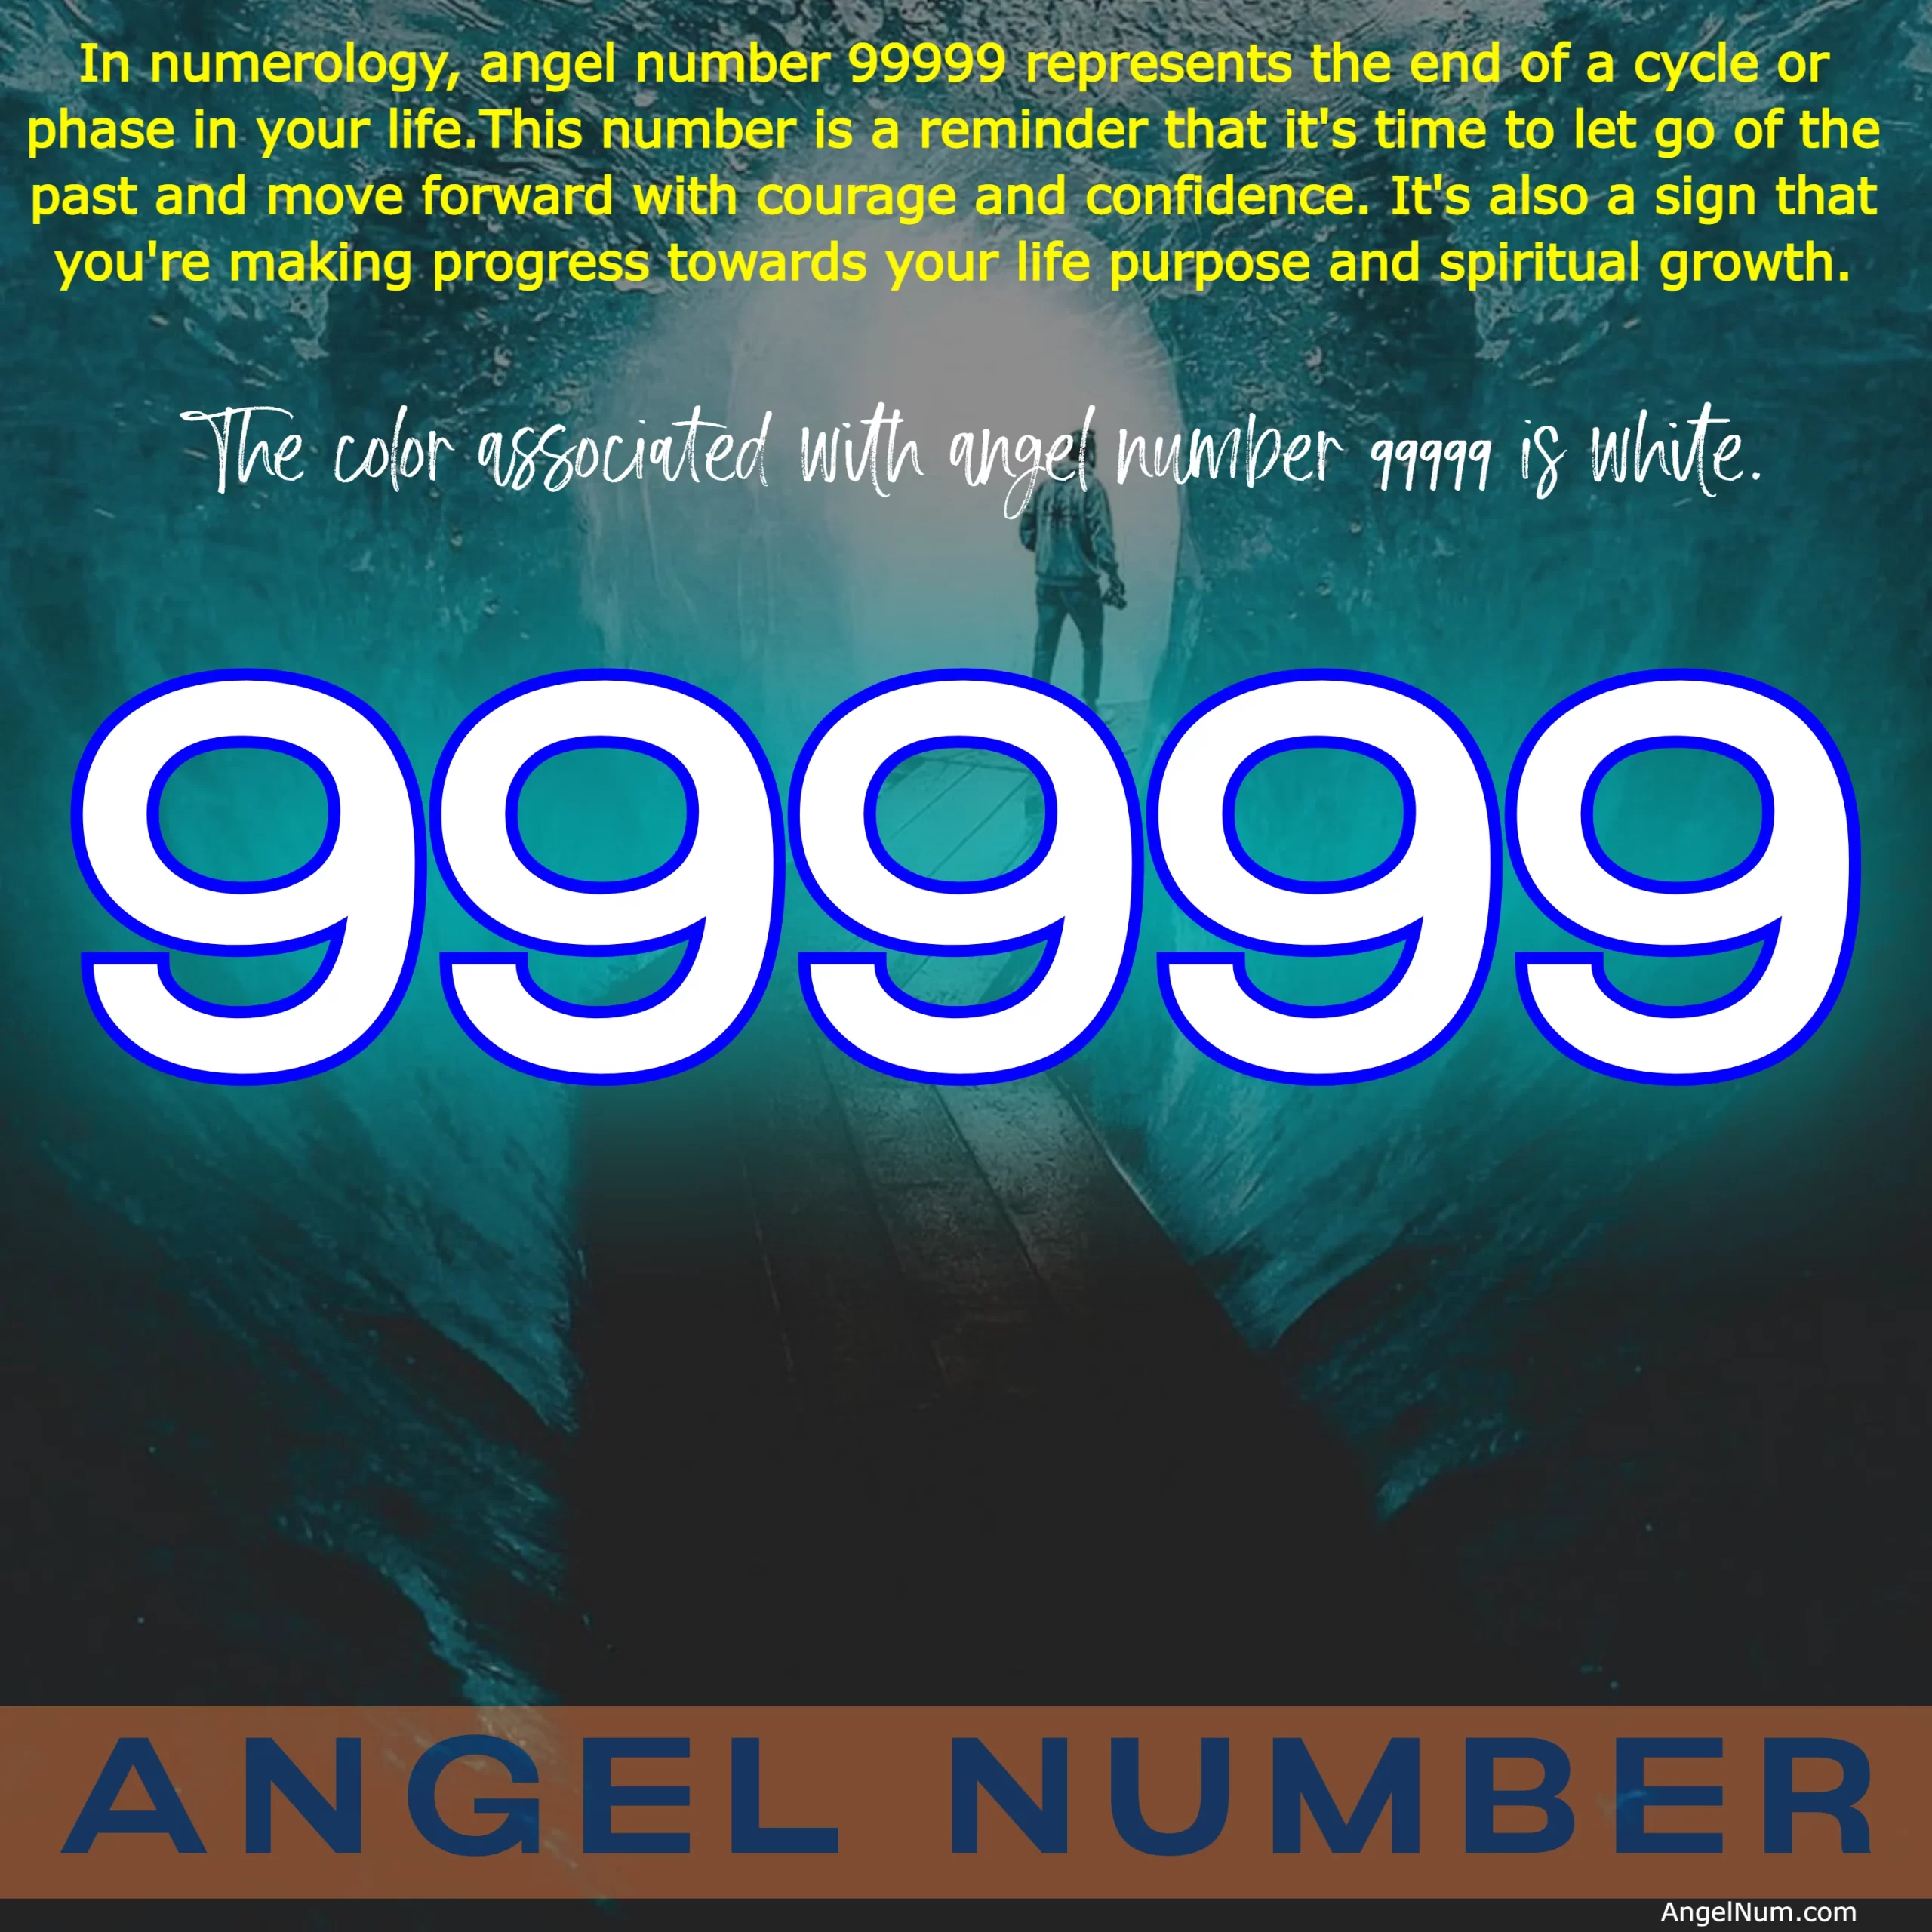 Angel Number 99999: Meaning, Symbolism, and Significance